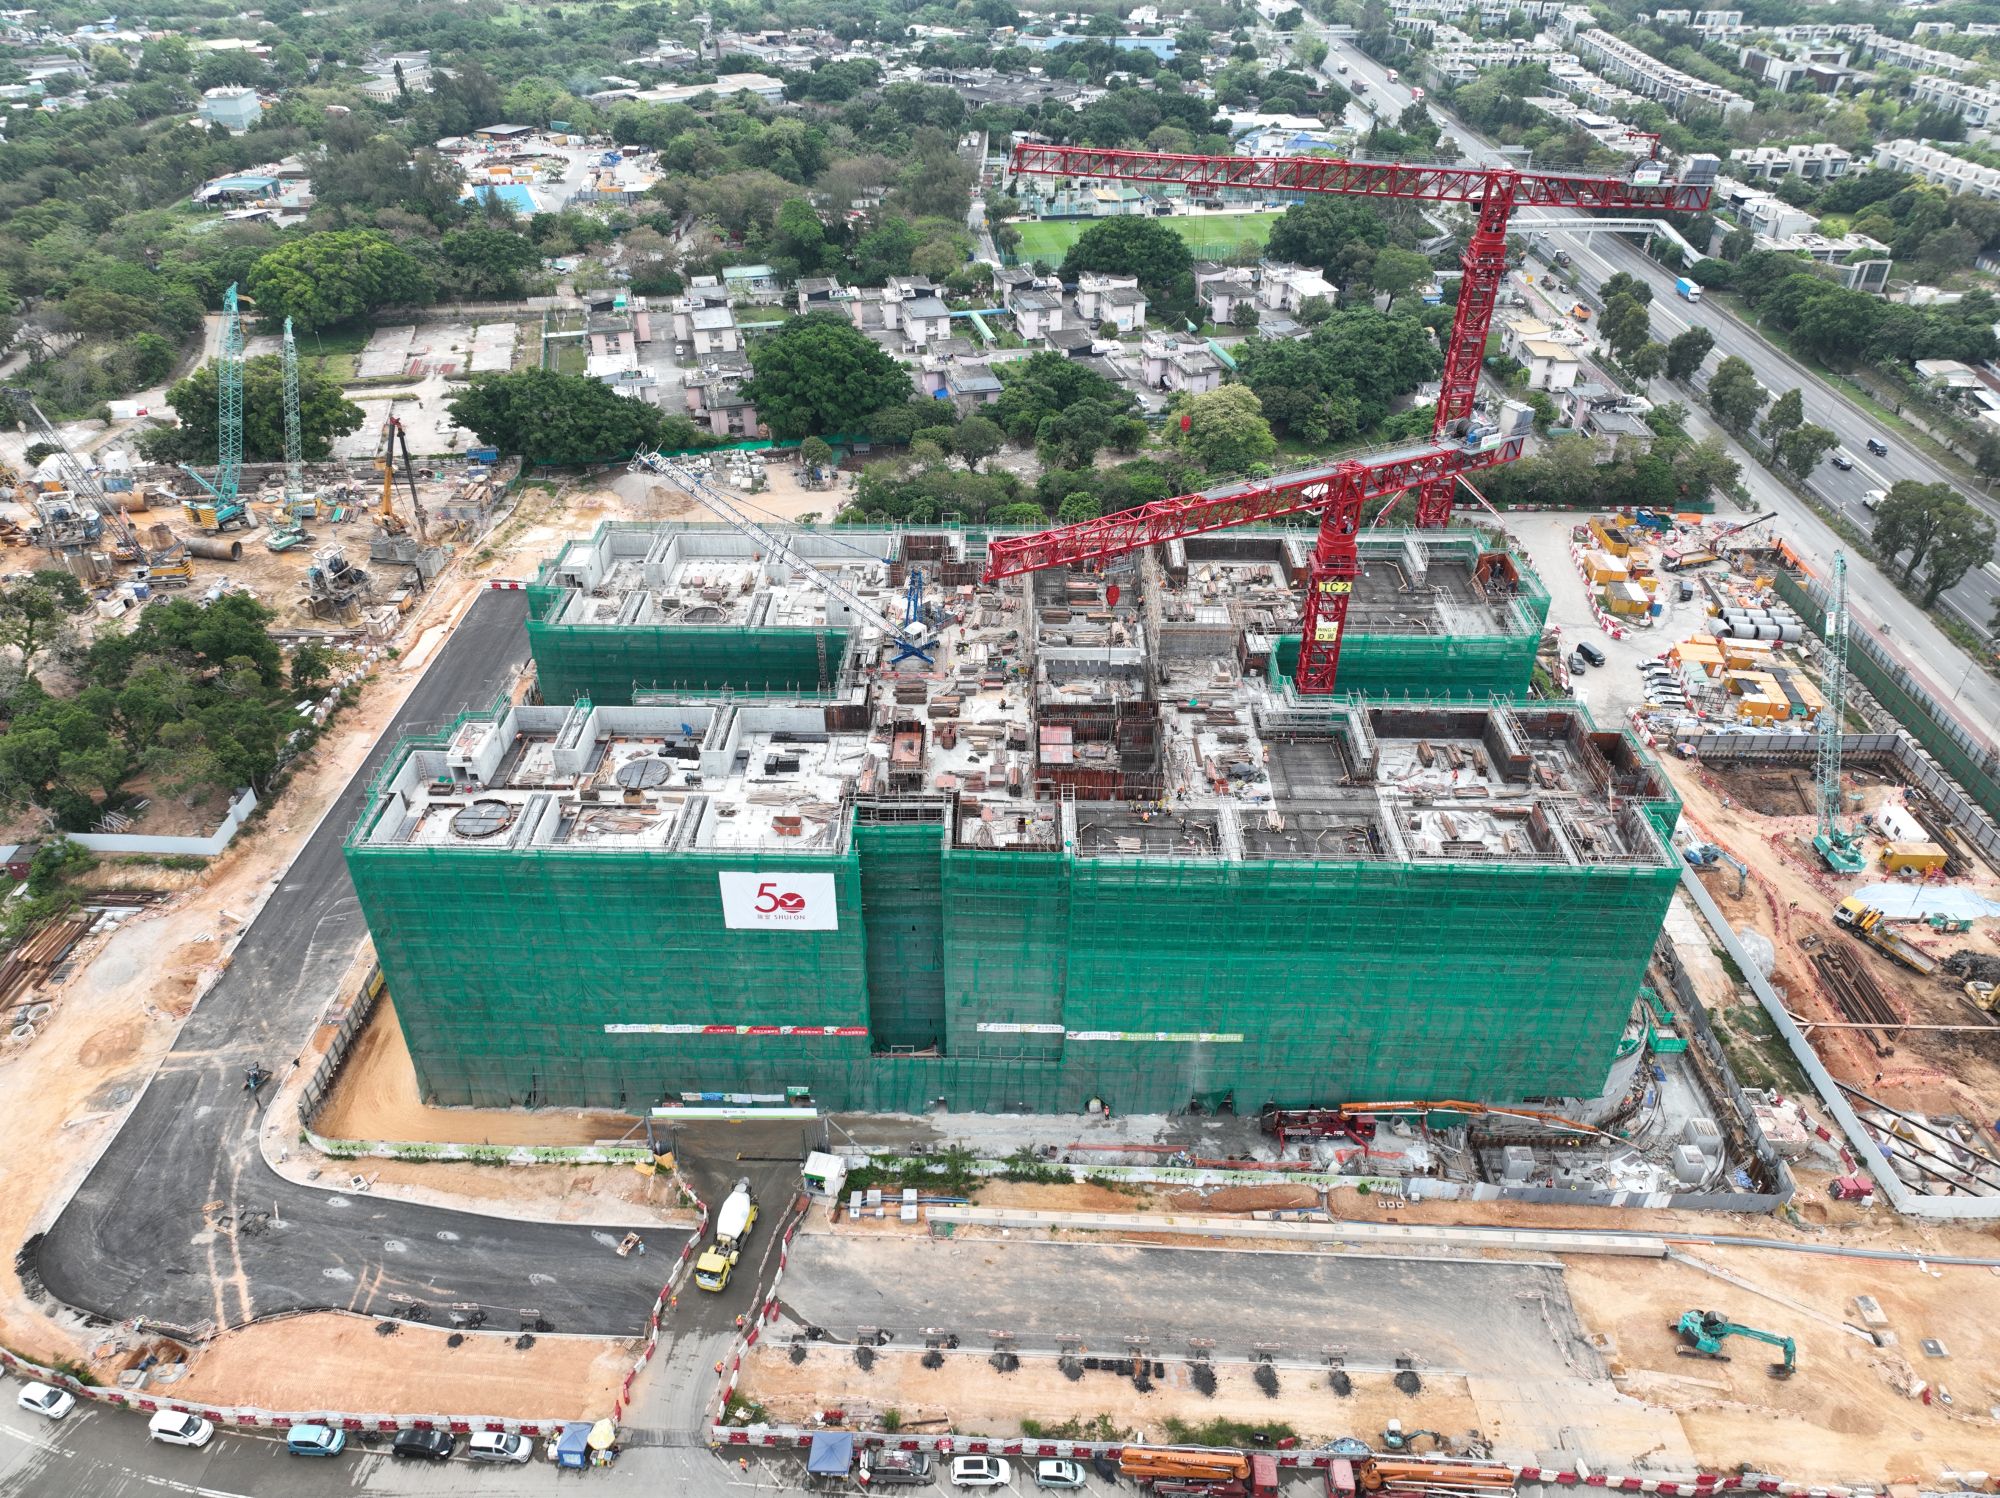 The eight-storey Multi-welfare Services Complex (“the Complex”) in Kwu Tung North, which will provide residential care home services, is being constructed at the site in Area 29 of the Kwu Tung North New Development Area.